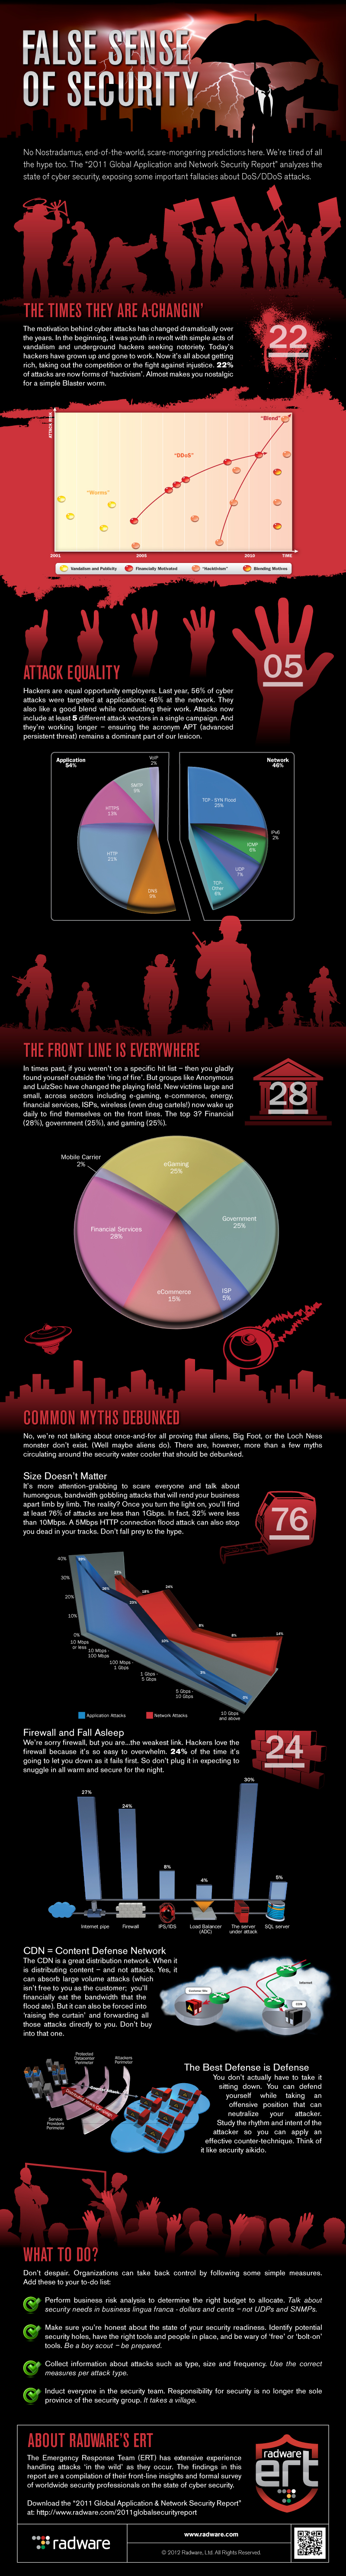 2011 Global Application & Network Security Infographic